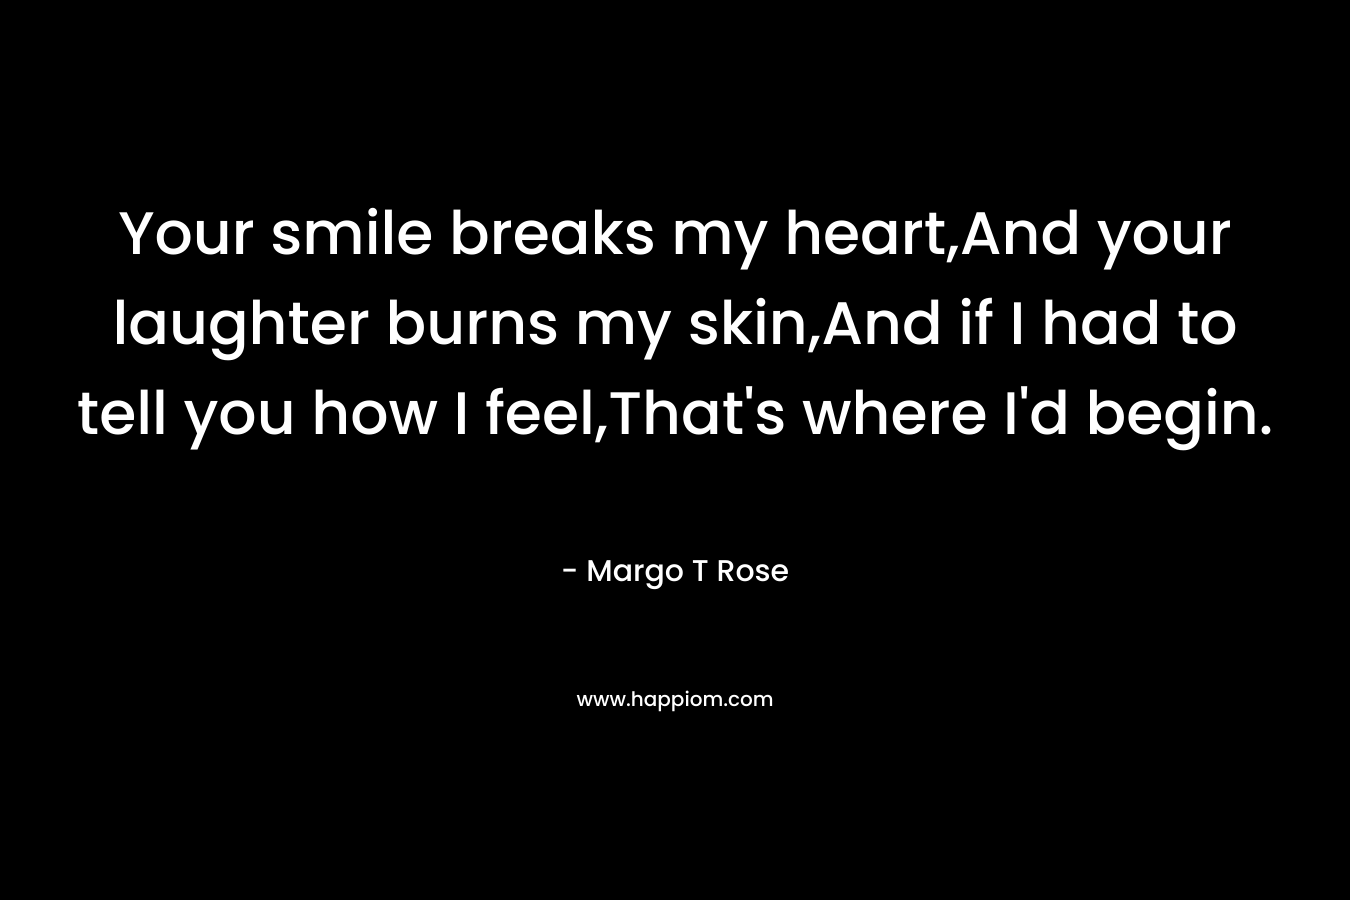 Your smile breaks my heart,And your laughter burns my skin,And if I had to tell you how I feel,That’s where I’d begin. – Margo T Rose